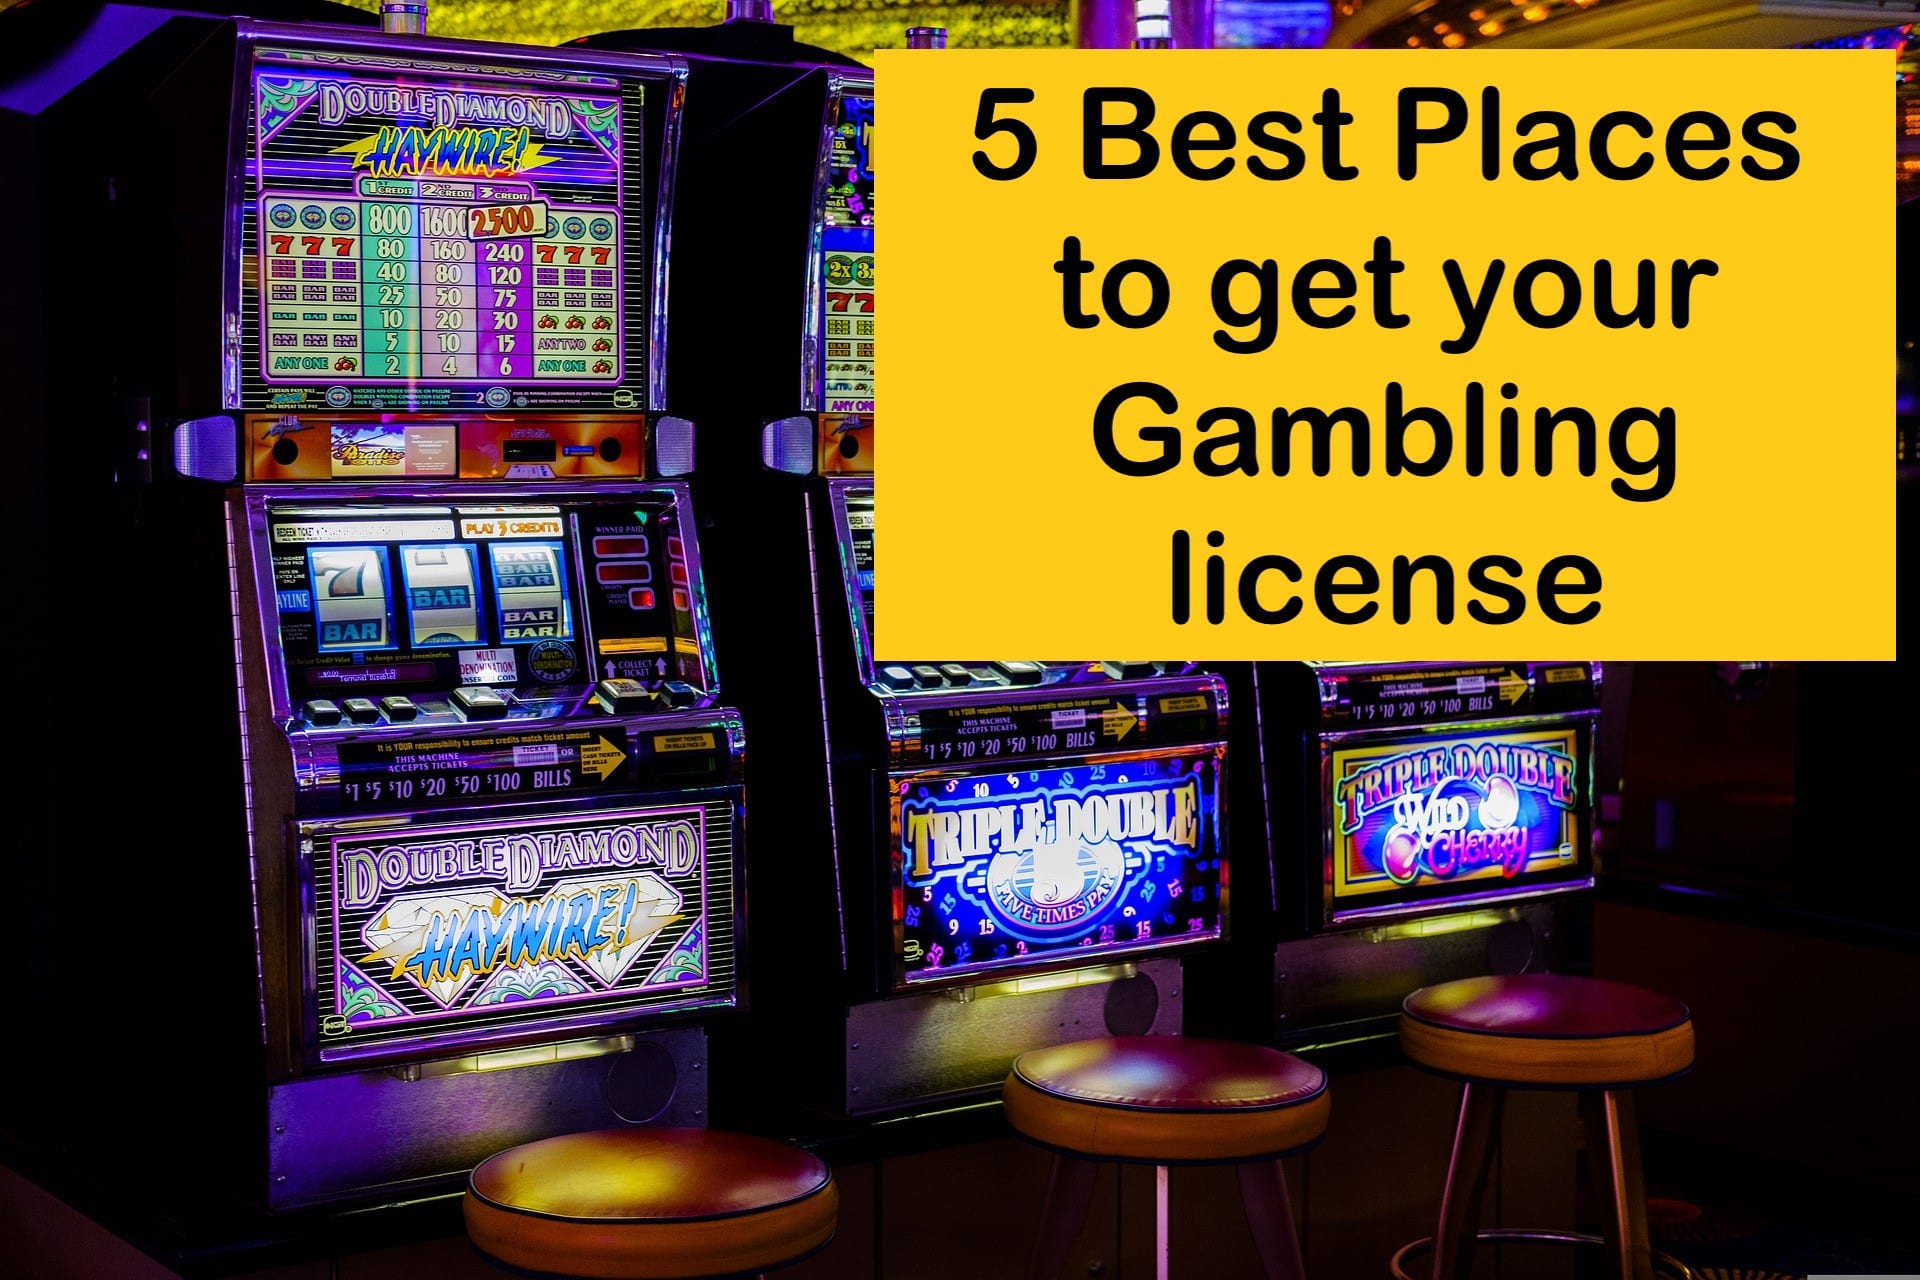 5 best places to get a gambling license